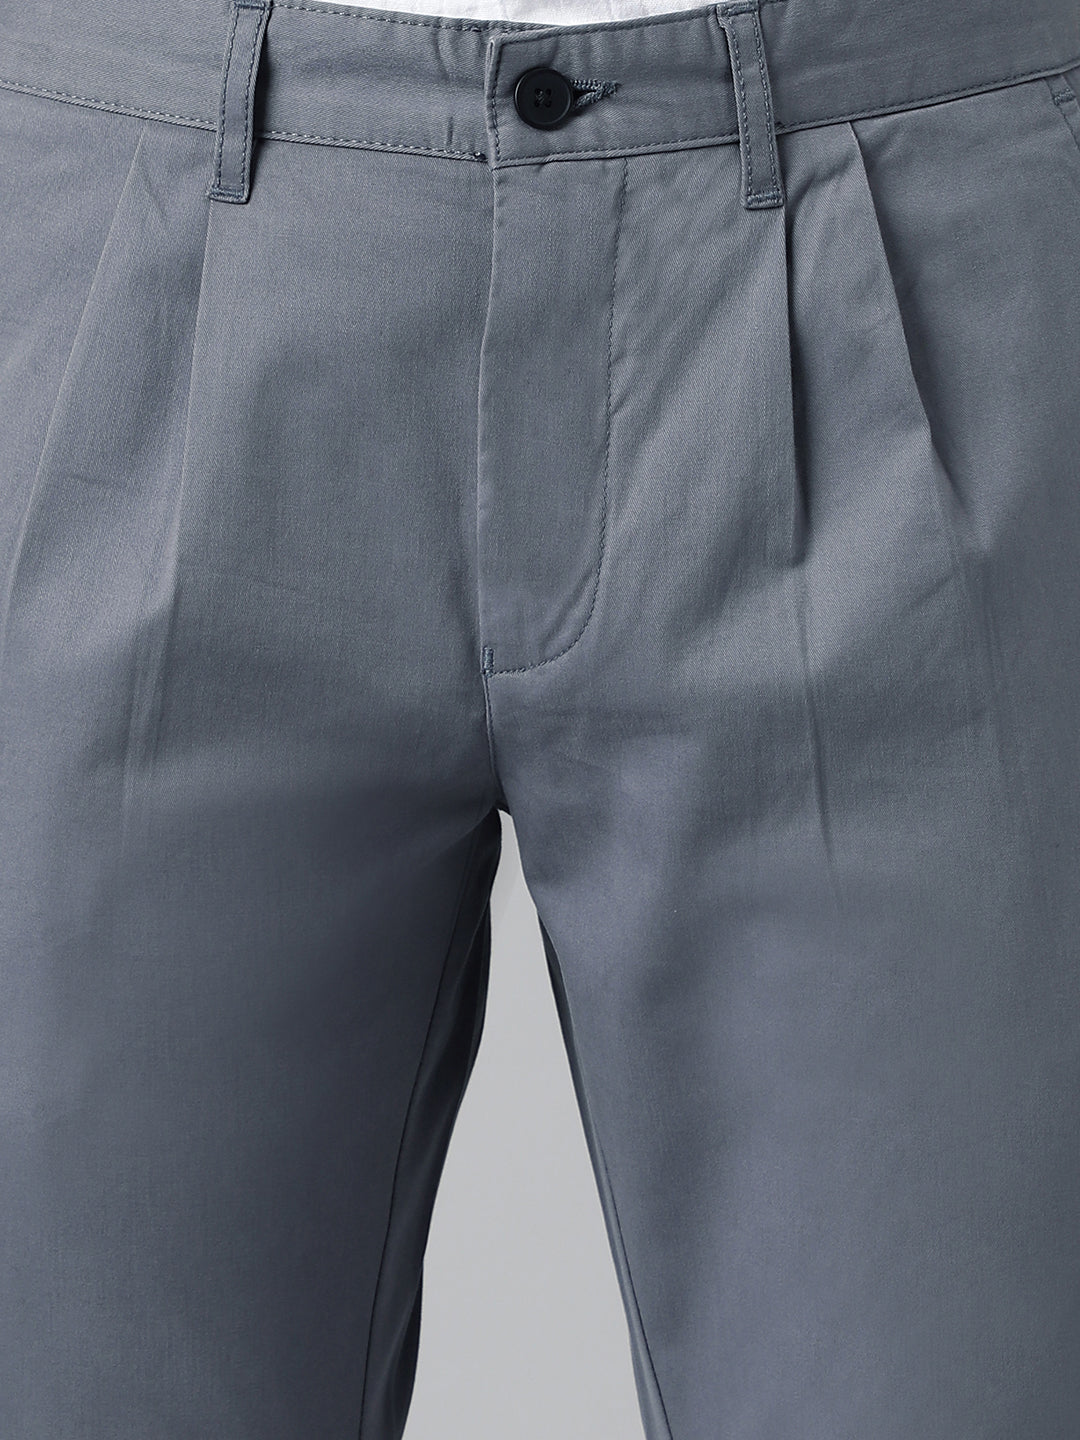 2 Way Stretch Pleated Chinos in Slate Grey- Comfort Fit